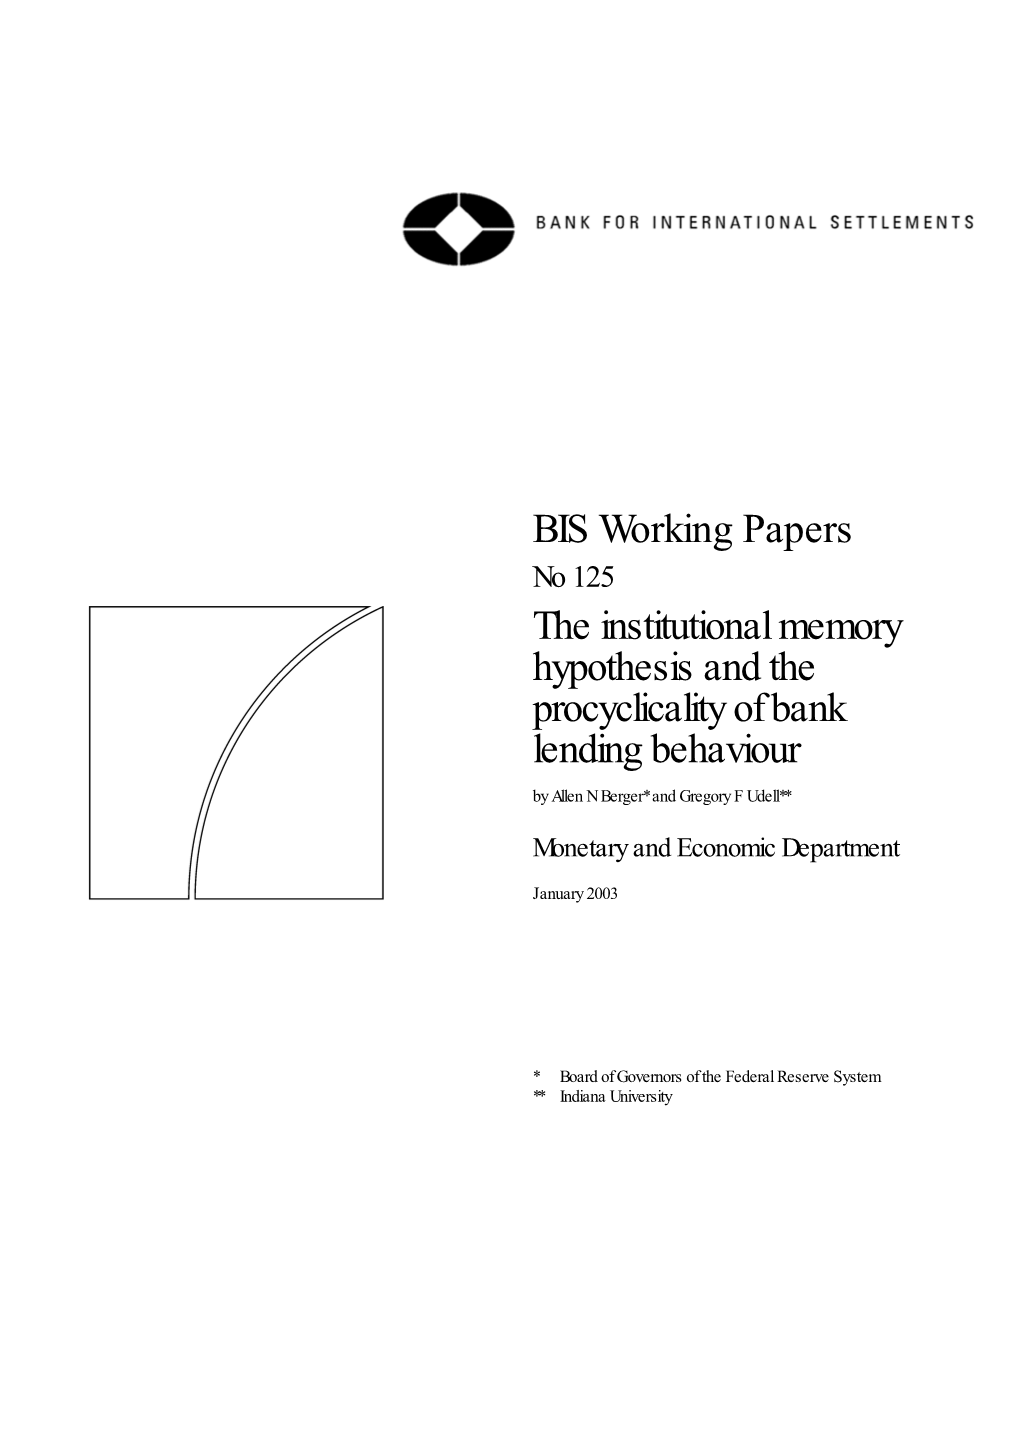 BIS Working Papers No 125 the Institutional Memory Hypothesis and the Procyclicality of Bank Lending Behaviour